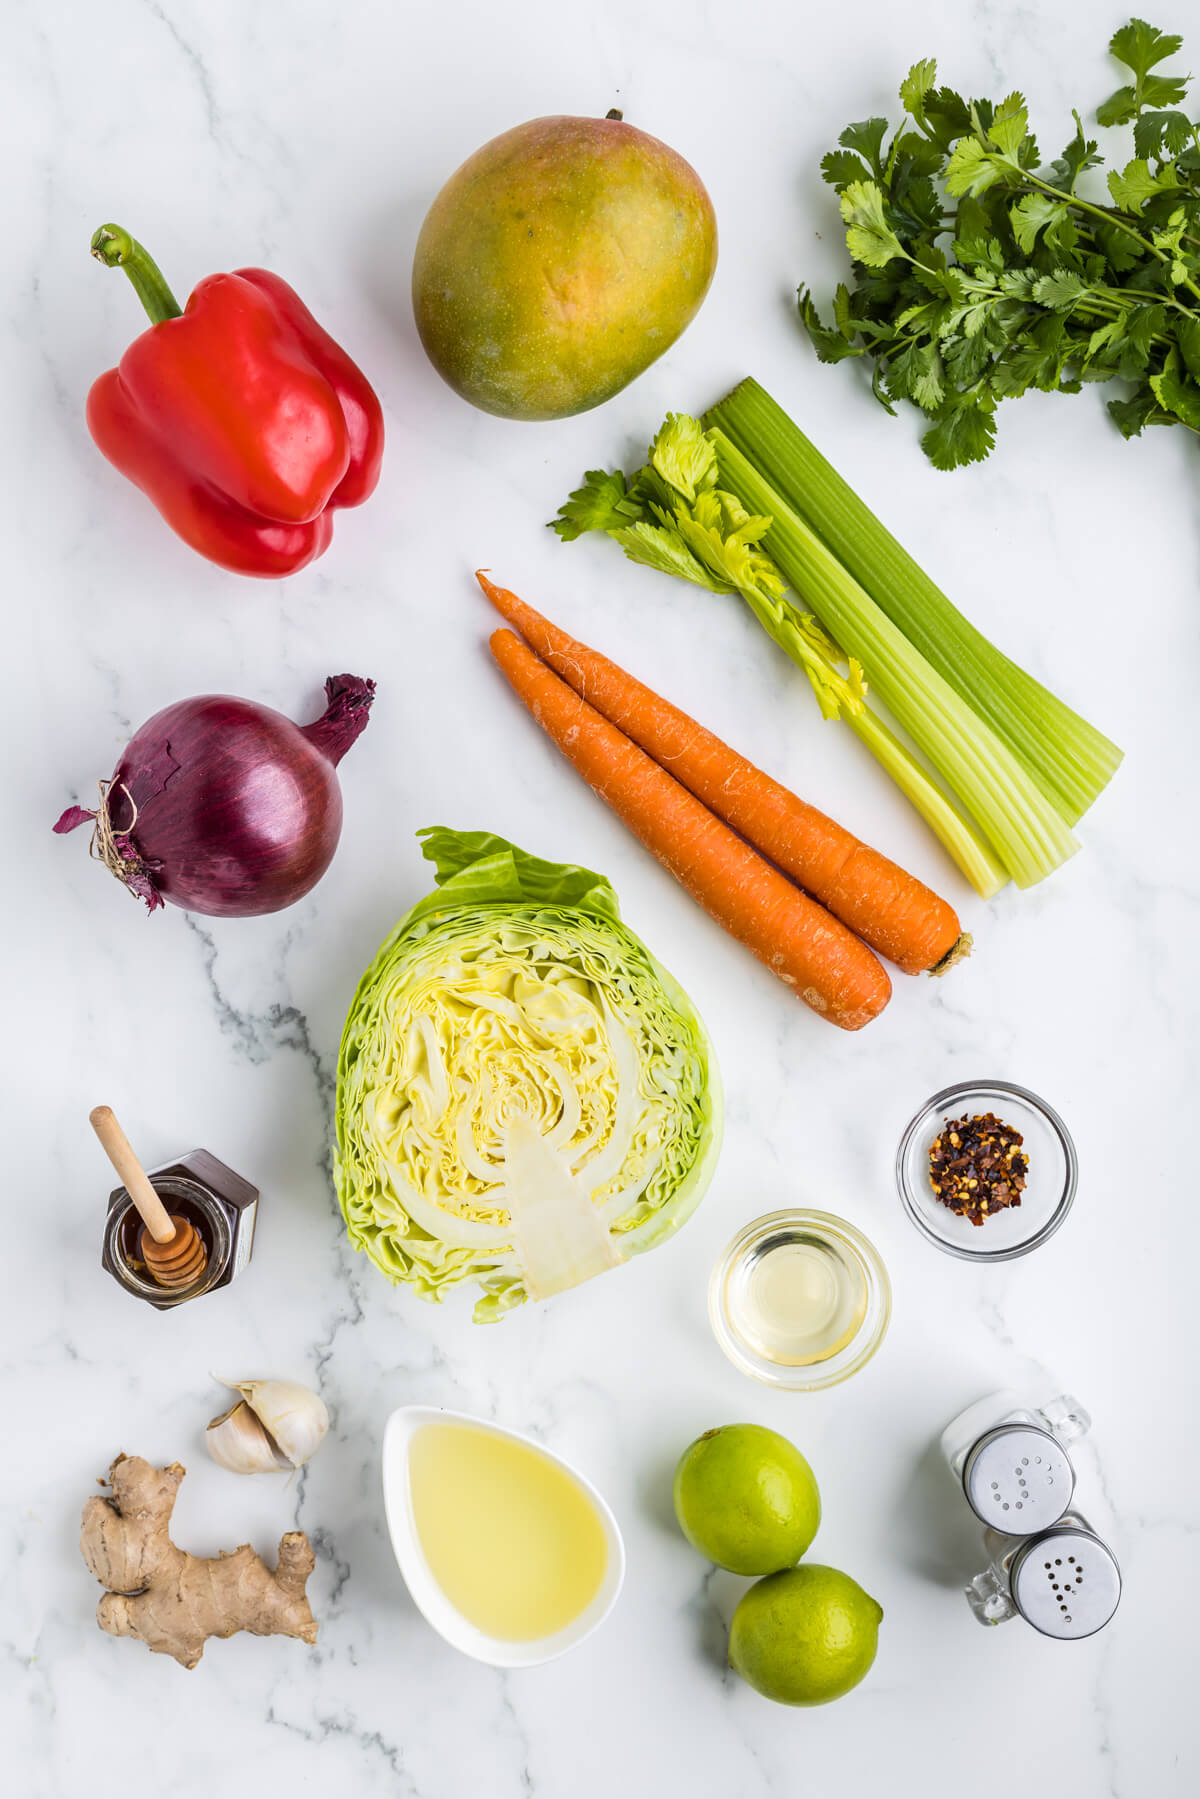 Ingredients required to make mango slaw including the mango dressing.